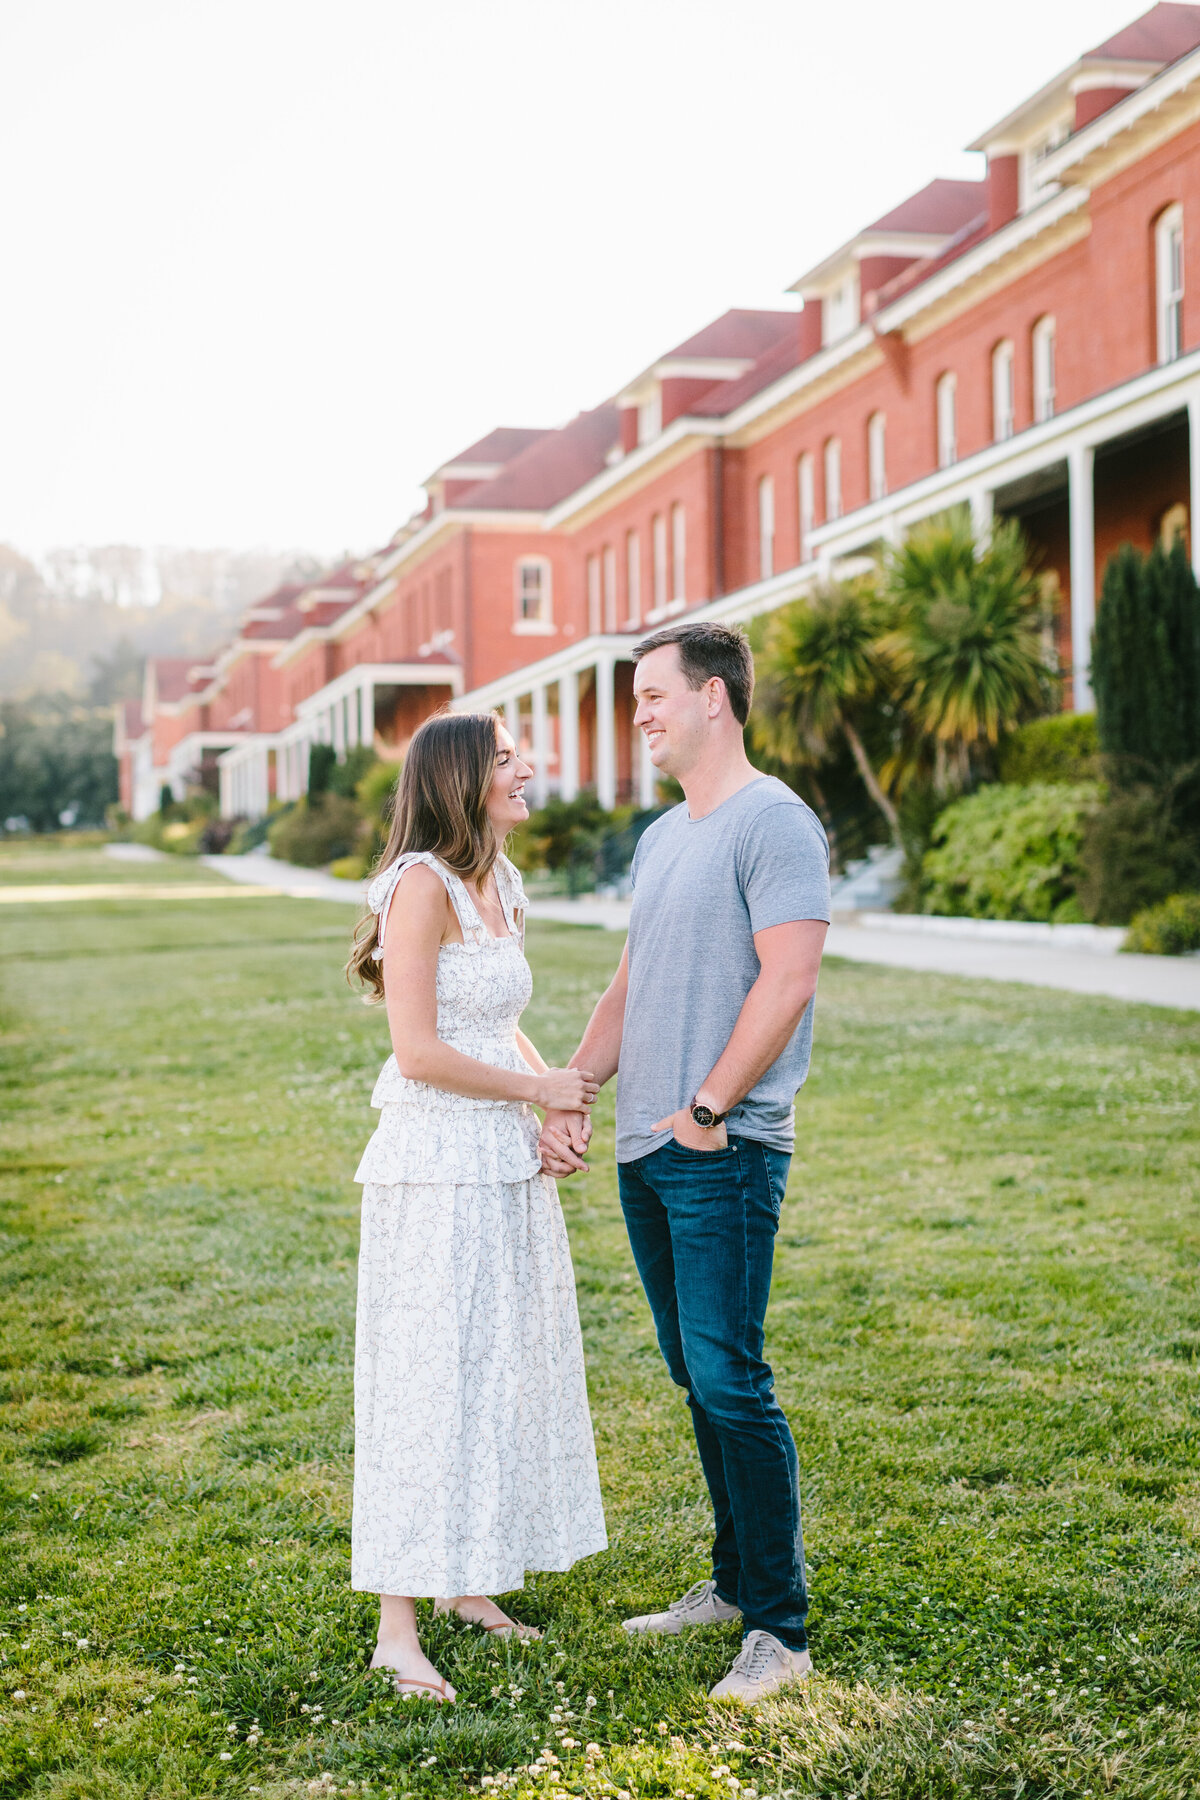 Best California and Texas Engagement Photographer-Jodee Debes Photography-91